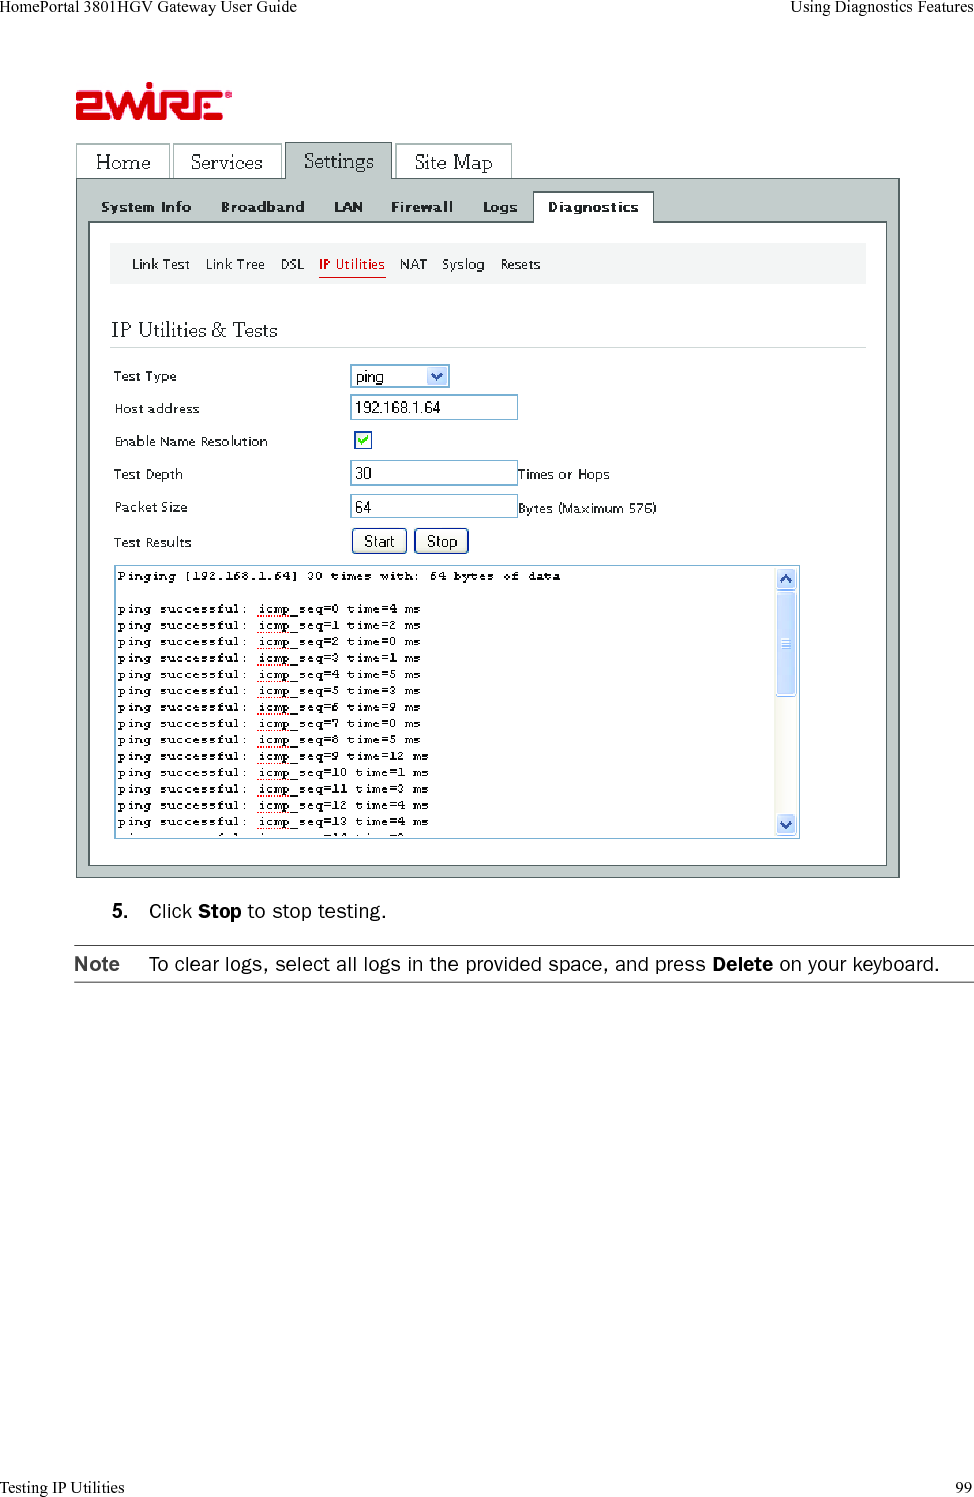 Testing IP Utilities 99HomePortal 3801HGV Gateway User Guide Using Diagnostics Features5. Click Stop to stop testing.Note To clear logs, select all logs in the provided space, and press Delete on your keyboard.